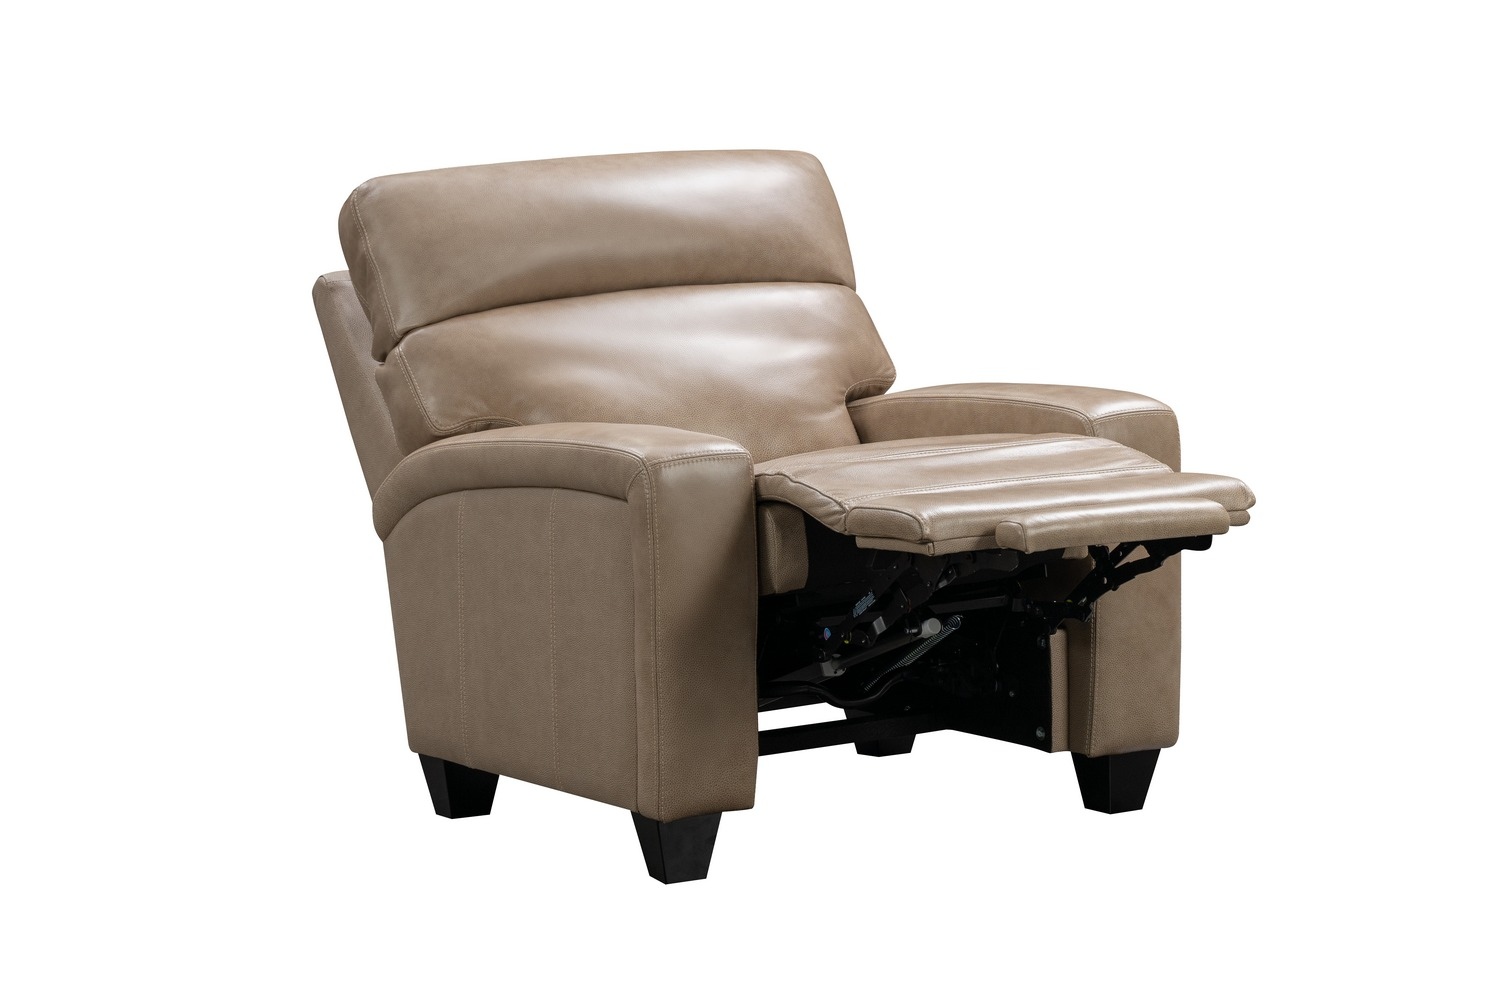 Barcalounger Marcello Power Recliner Chair with Power Head Rest and Power Lumbar - Elliot Taupe/Leather Match